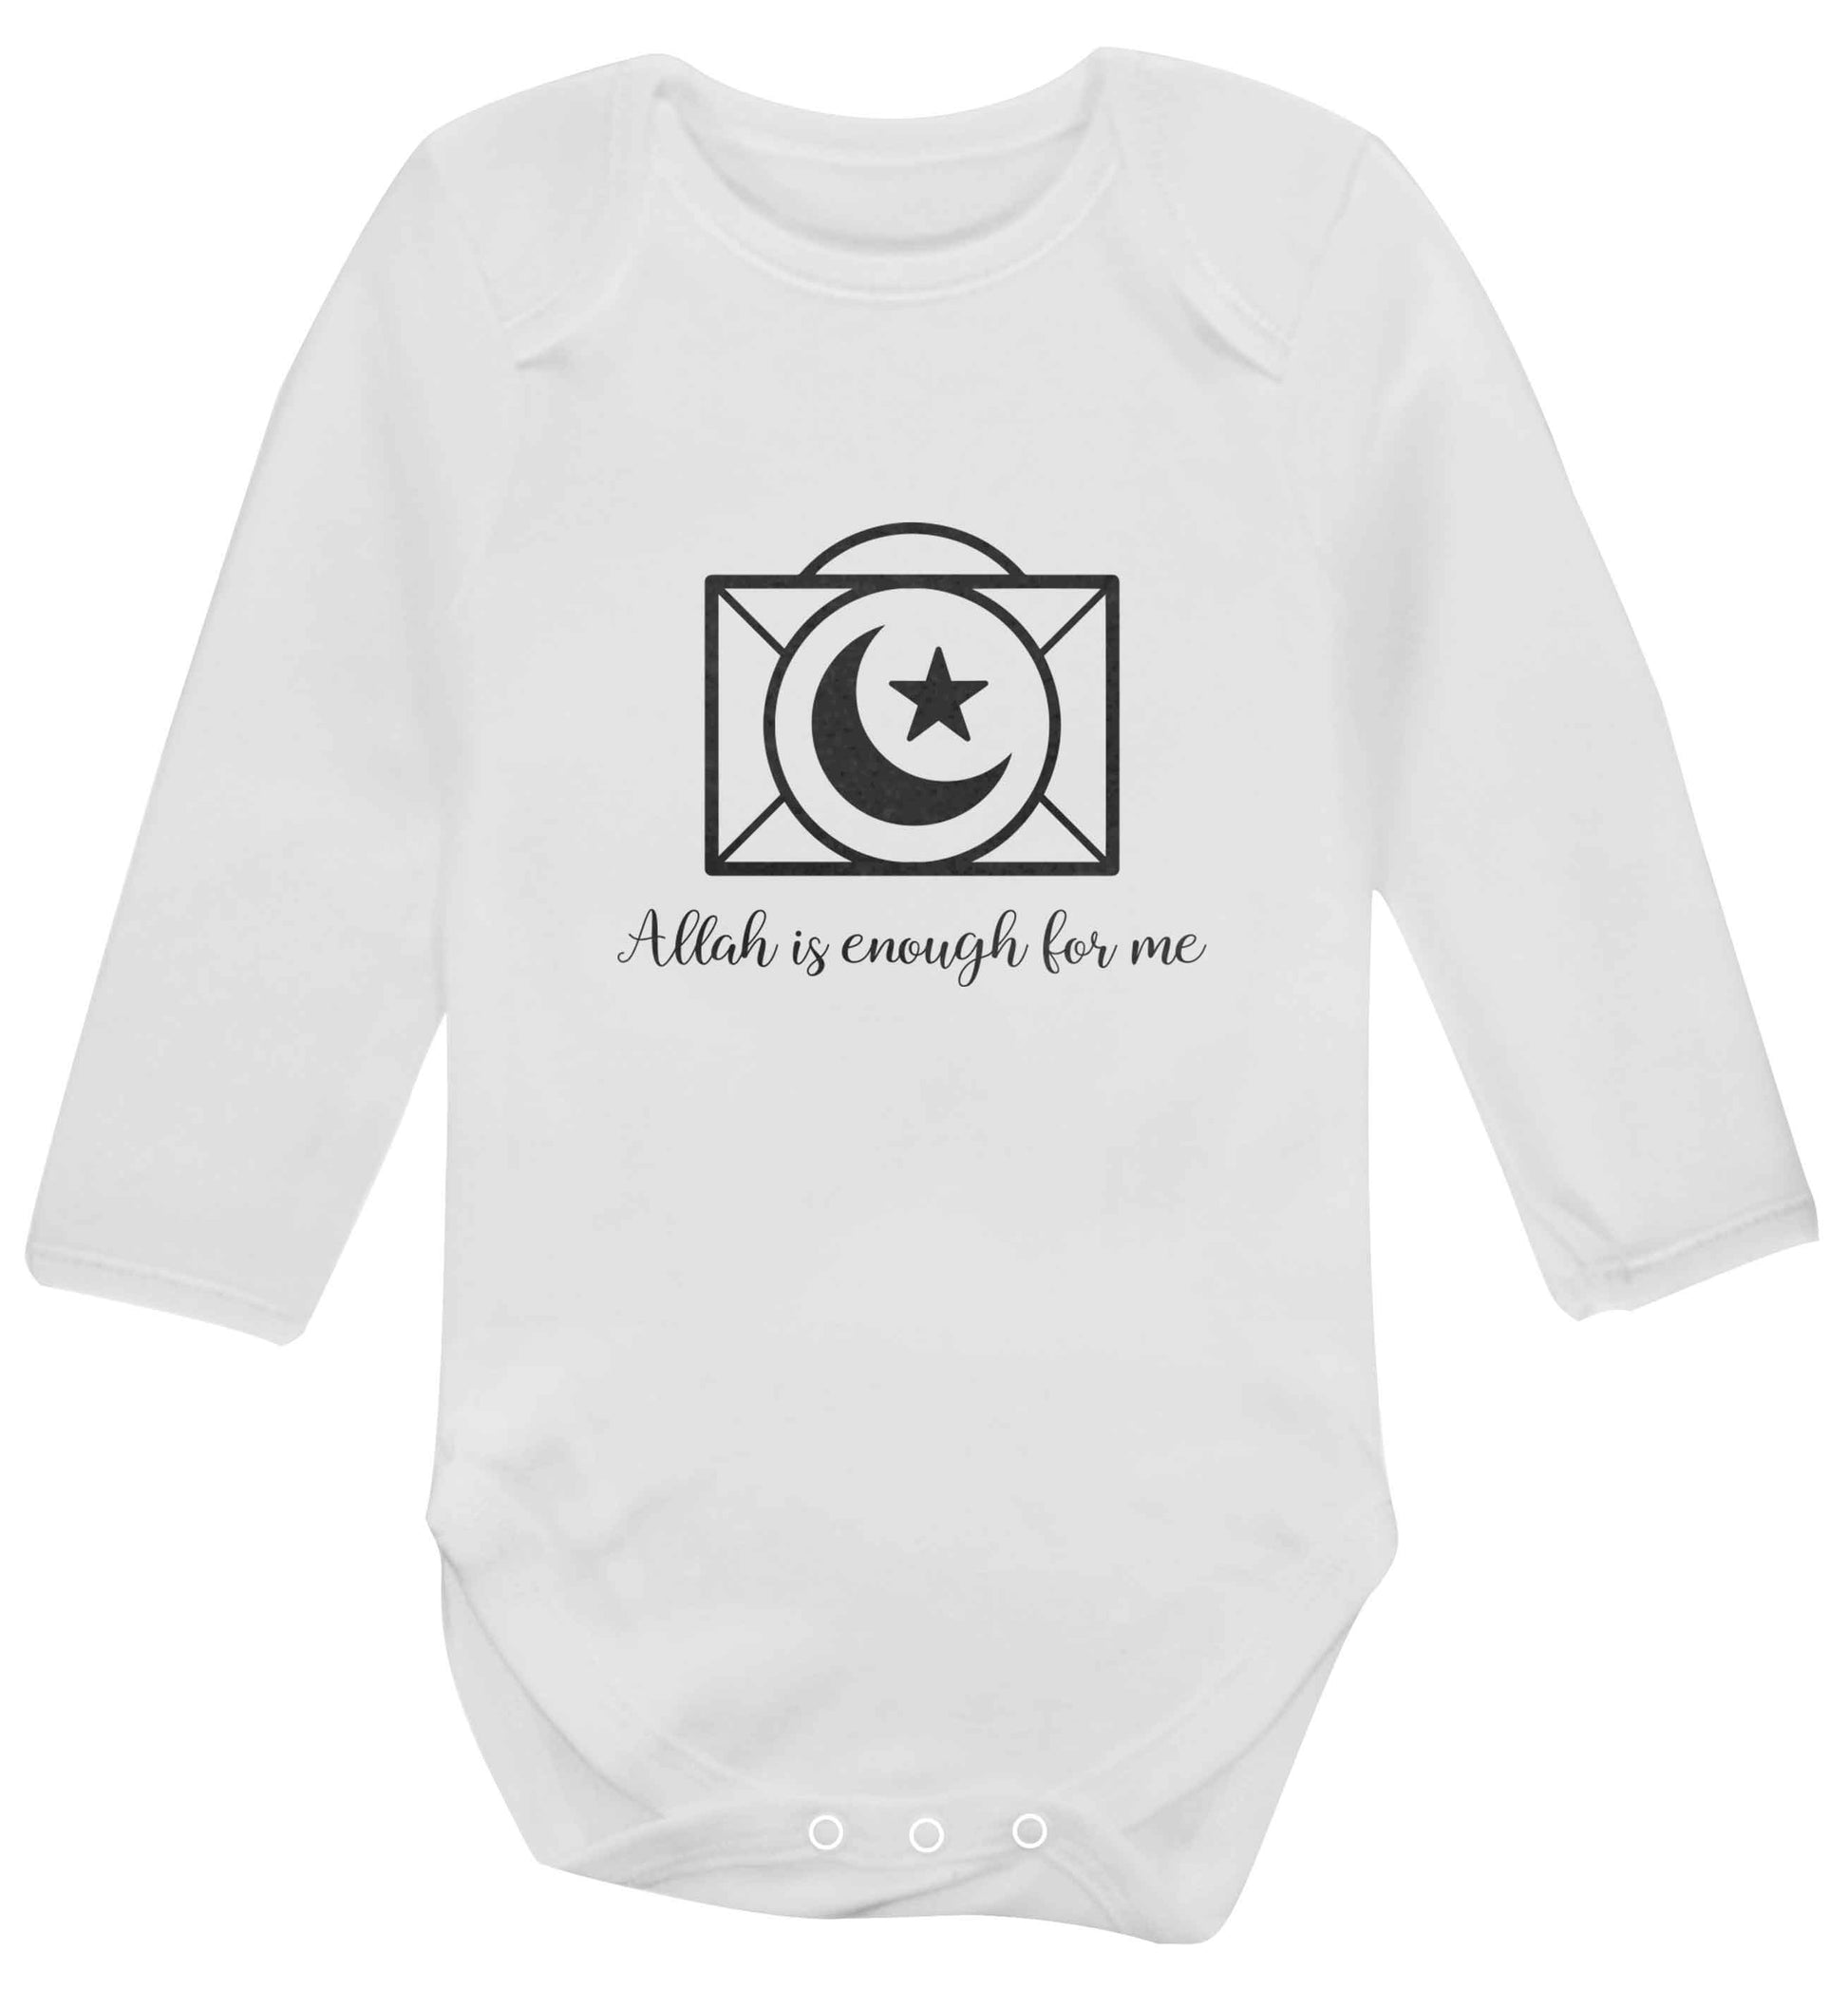 Allah is enough for me baby vest long sleeved white 6-12 months